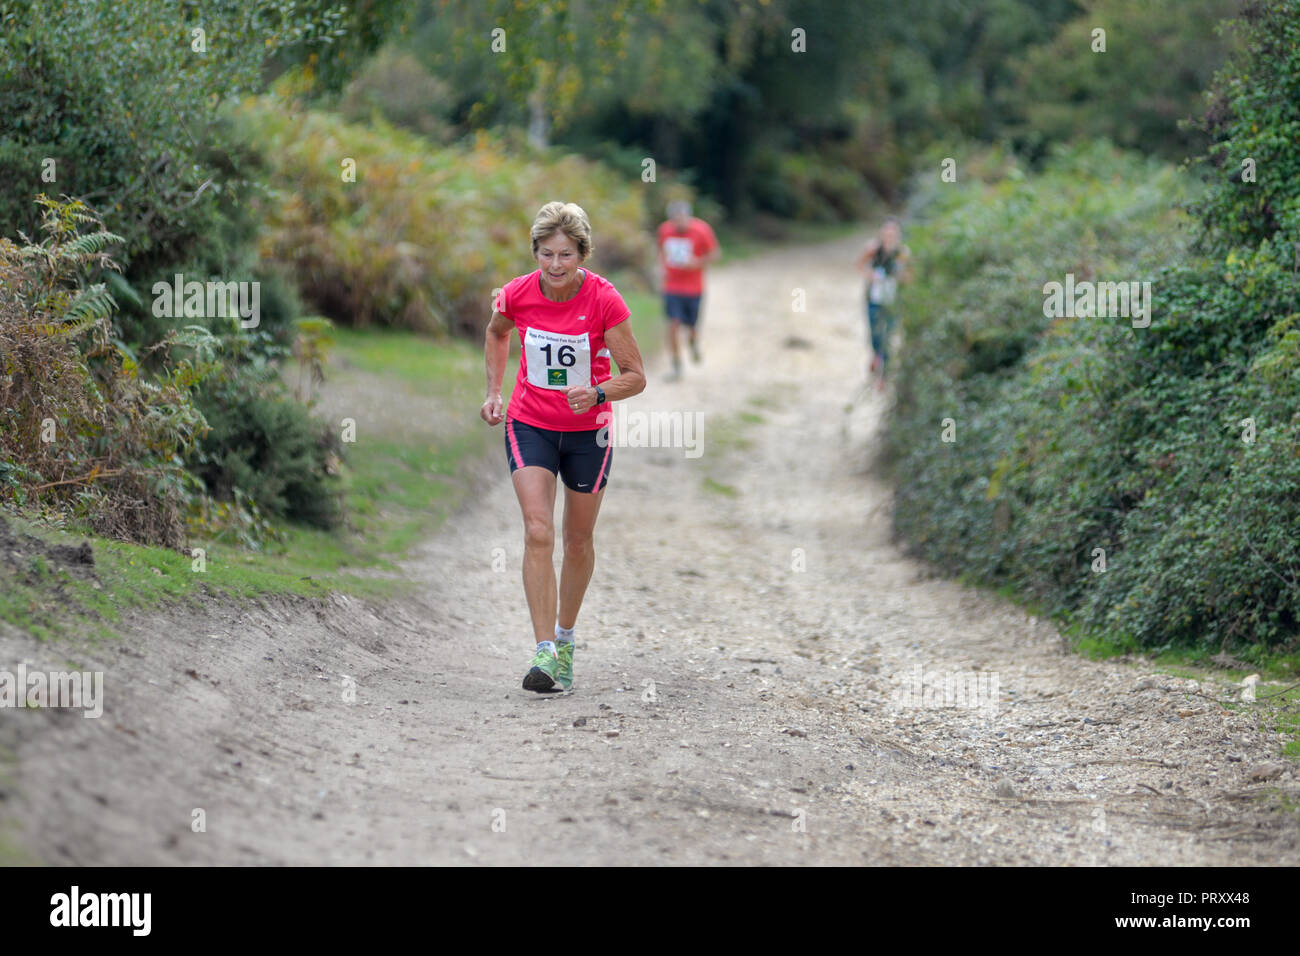 Runners in an amateur cross country running race, New Forest, Hampshire, UK Stock Photo